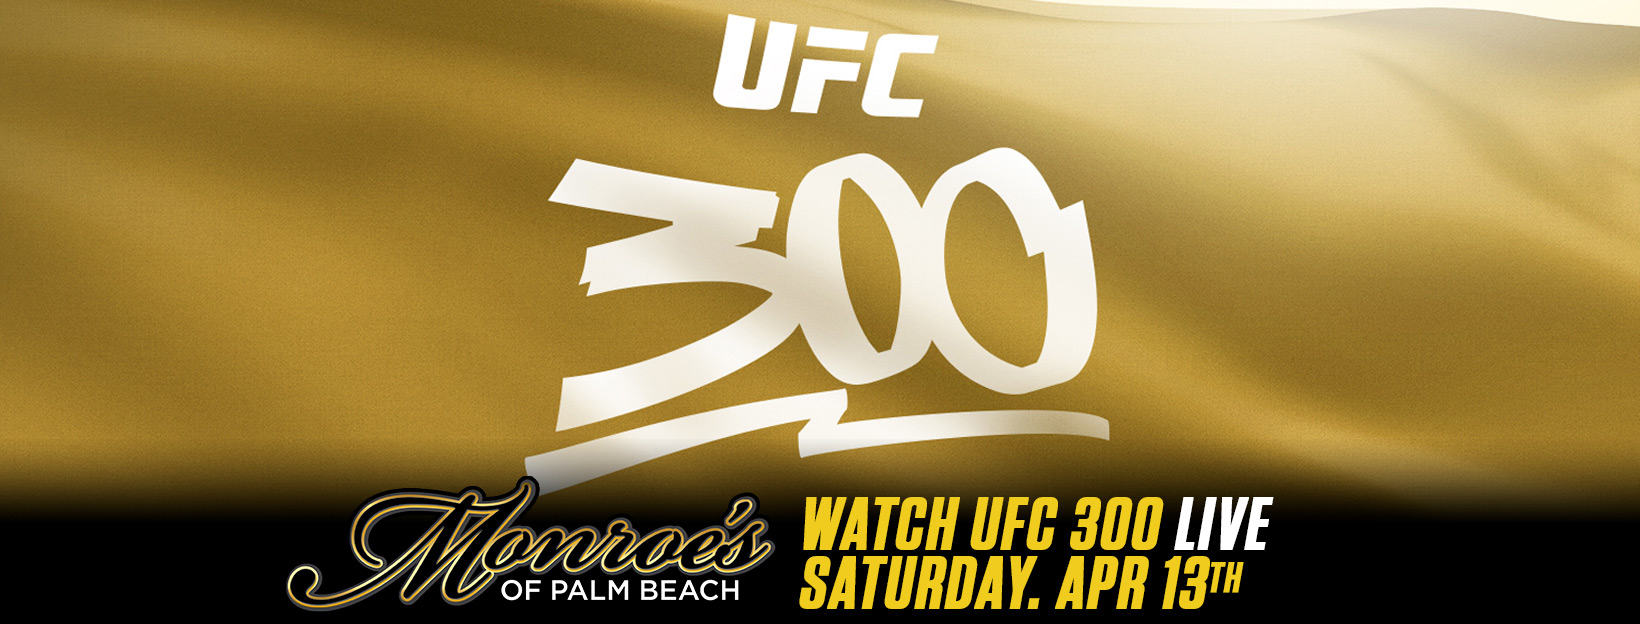 UFC 300 Live Watch Party Monroes Palm Beach